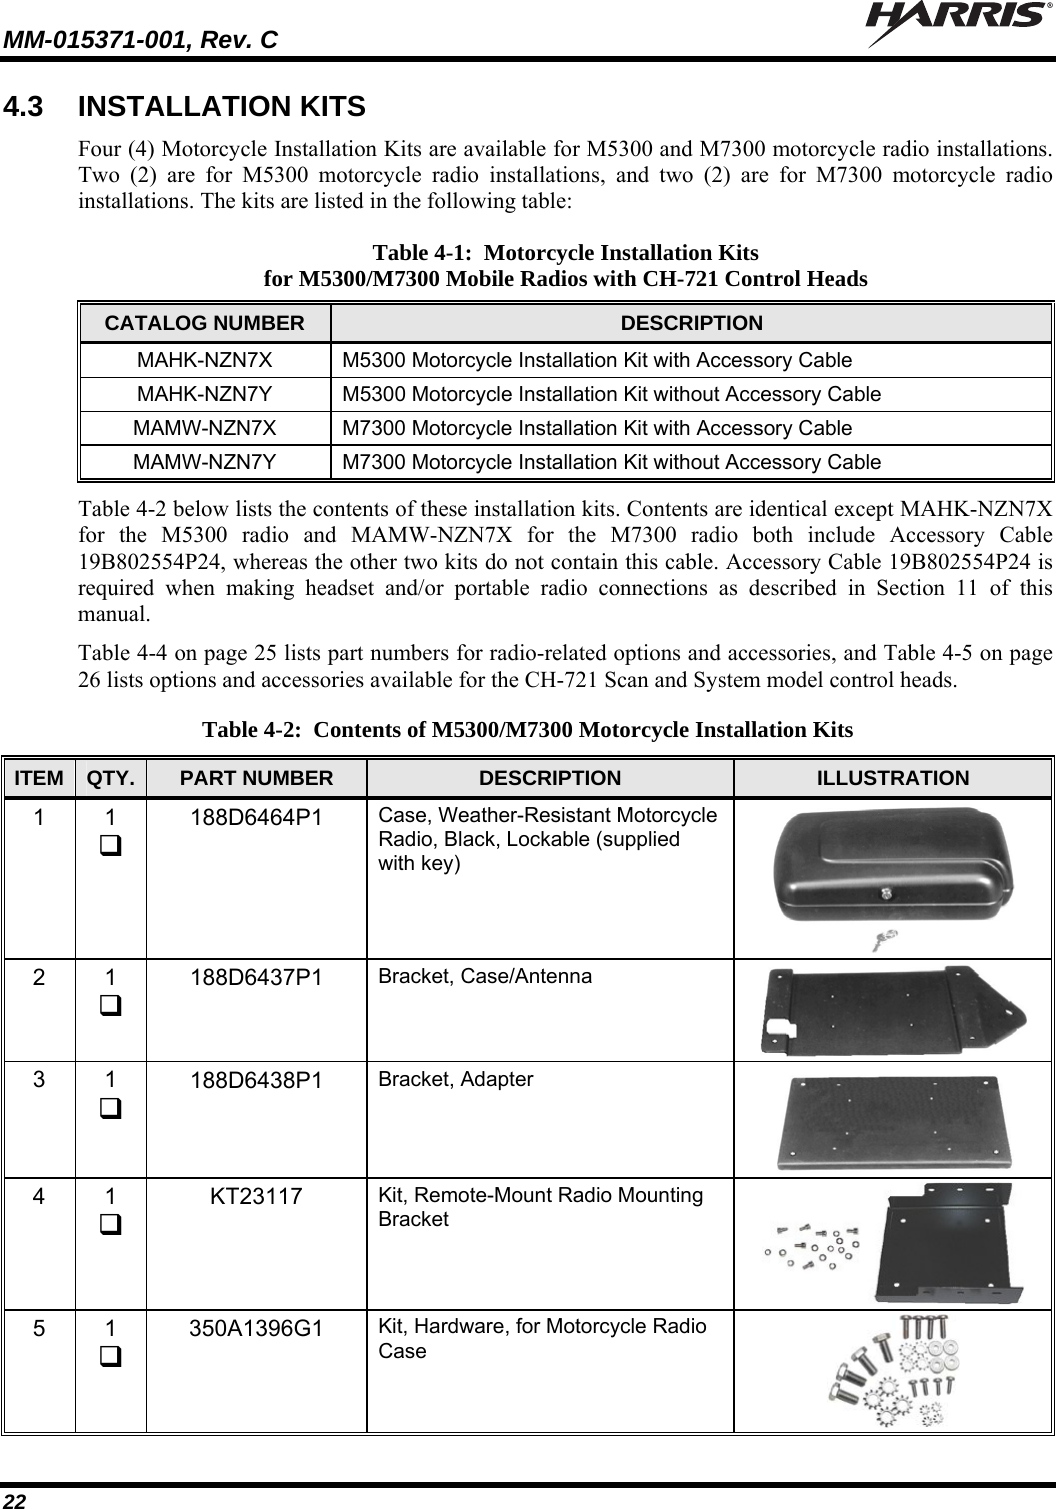 MM-015371-001, Rev. C   22 4.3  INSTALLATION KITS Four (4) Motorcycle Installation Kits are available for M5300 and M7300 motorcycle radio installations. Two (2) are for M5300 motorcycle radio installations, and two (2) are for M7300 motorcycle radio installations. The kits are listed in the following table: Table 4-1:  Motorcycle Installation Kits for M5300/M7300 Mobile Radios with CH-721 Control Heads CATALOG NUMBER  DESCRIPTION MAHK-NZN7X  M5300 Motorcycle Installation Kit with Accessory Cable MAHK-NZN7Y  M5300 Motorcycle Installation Kit without Accessory Cable MAMW-NZN7X  M7300 Motorcycle Installation Kit with Accessory Cable MAMW-NZN7Y  M7300 Motorcycle Installation Kit without Accessory Cable Table 4-2 below lists the contents of these installation kits. Contents are identical except MAHK-NZN7X for the M5300 radio and MAMW-NZN7X for the M7300 radio both include Accessory Cable 19B802554P24, whereas the other two kits do not contain this cable. Accessory Cable 19B802554P24 is required when making headset and/or portable radio connections as described in Section 11 of this manual. Table 4-4 on page 25 lists part numbers for radio-related options and accessories, and Table 4-5 on page 26 lists options and accessories available for the CH-721 Scan and System model control heads.  Table 4-2:  Contents of M5300/M7300 Motorcycle Installation Kits ITEM  QTY.  PART NUMBER  DESCRIPTION  ILLUSTRATION 1 1  188D6464P1  Case, Weather-Resistant Motorcycle Radio, Black, Lockable (supplied with key)  2 1  188D6437P1  Bracket, Case/Antenna  3 1  188D6438P1  Bracket, Adapter  4 1  KT23117  Kit, Remote-Mount Radio Mounting Bracket  5 1  350A1396G1  Kit, Hardware, for Motorcycle Radio Case  